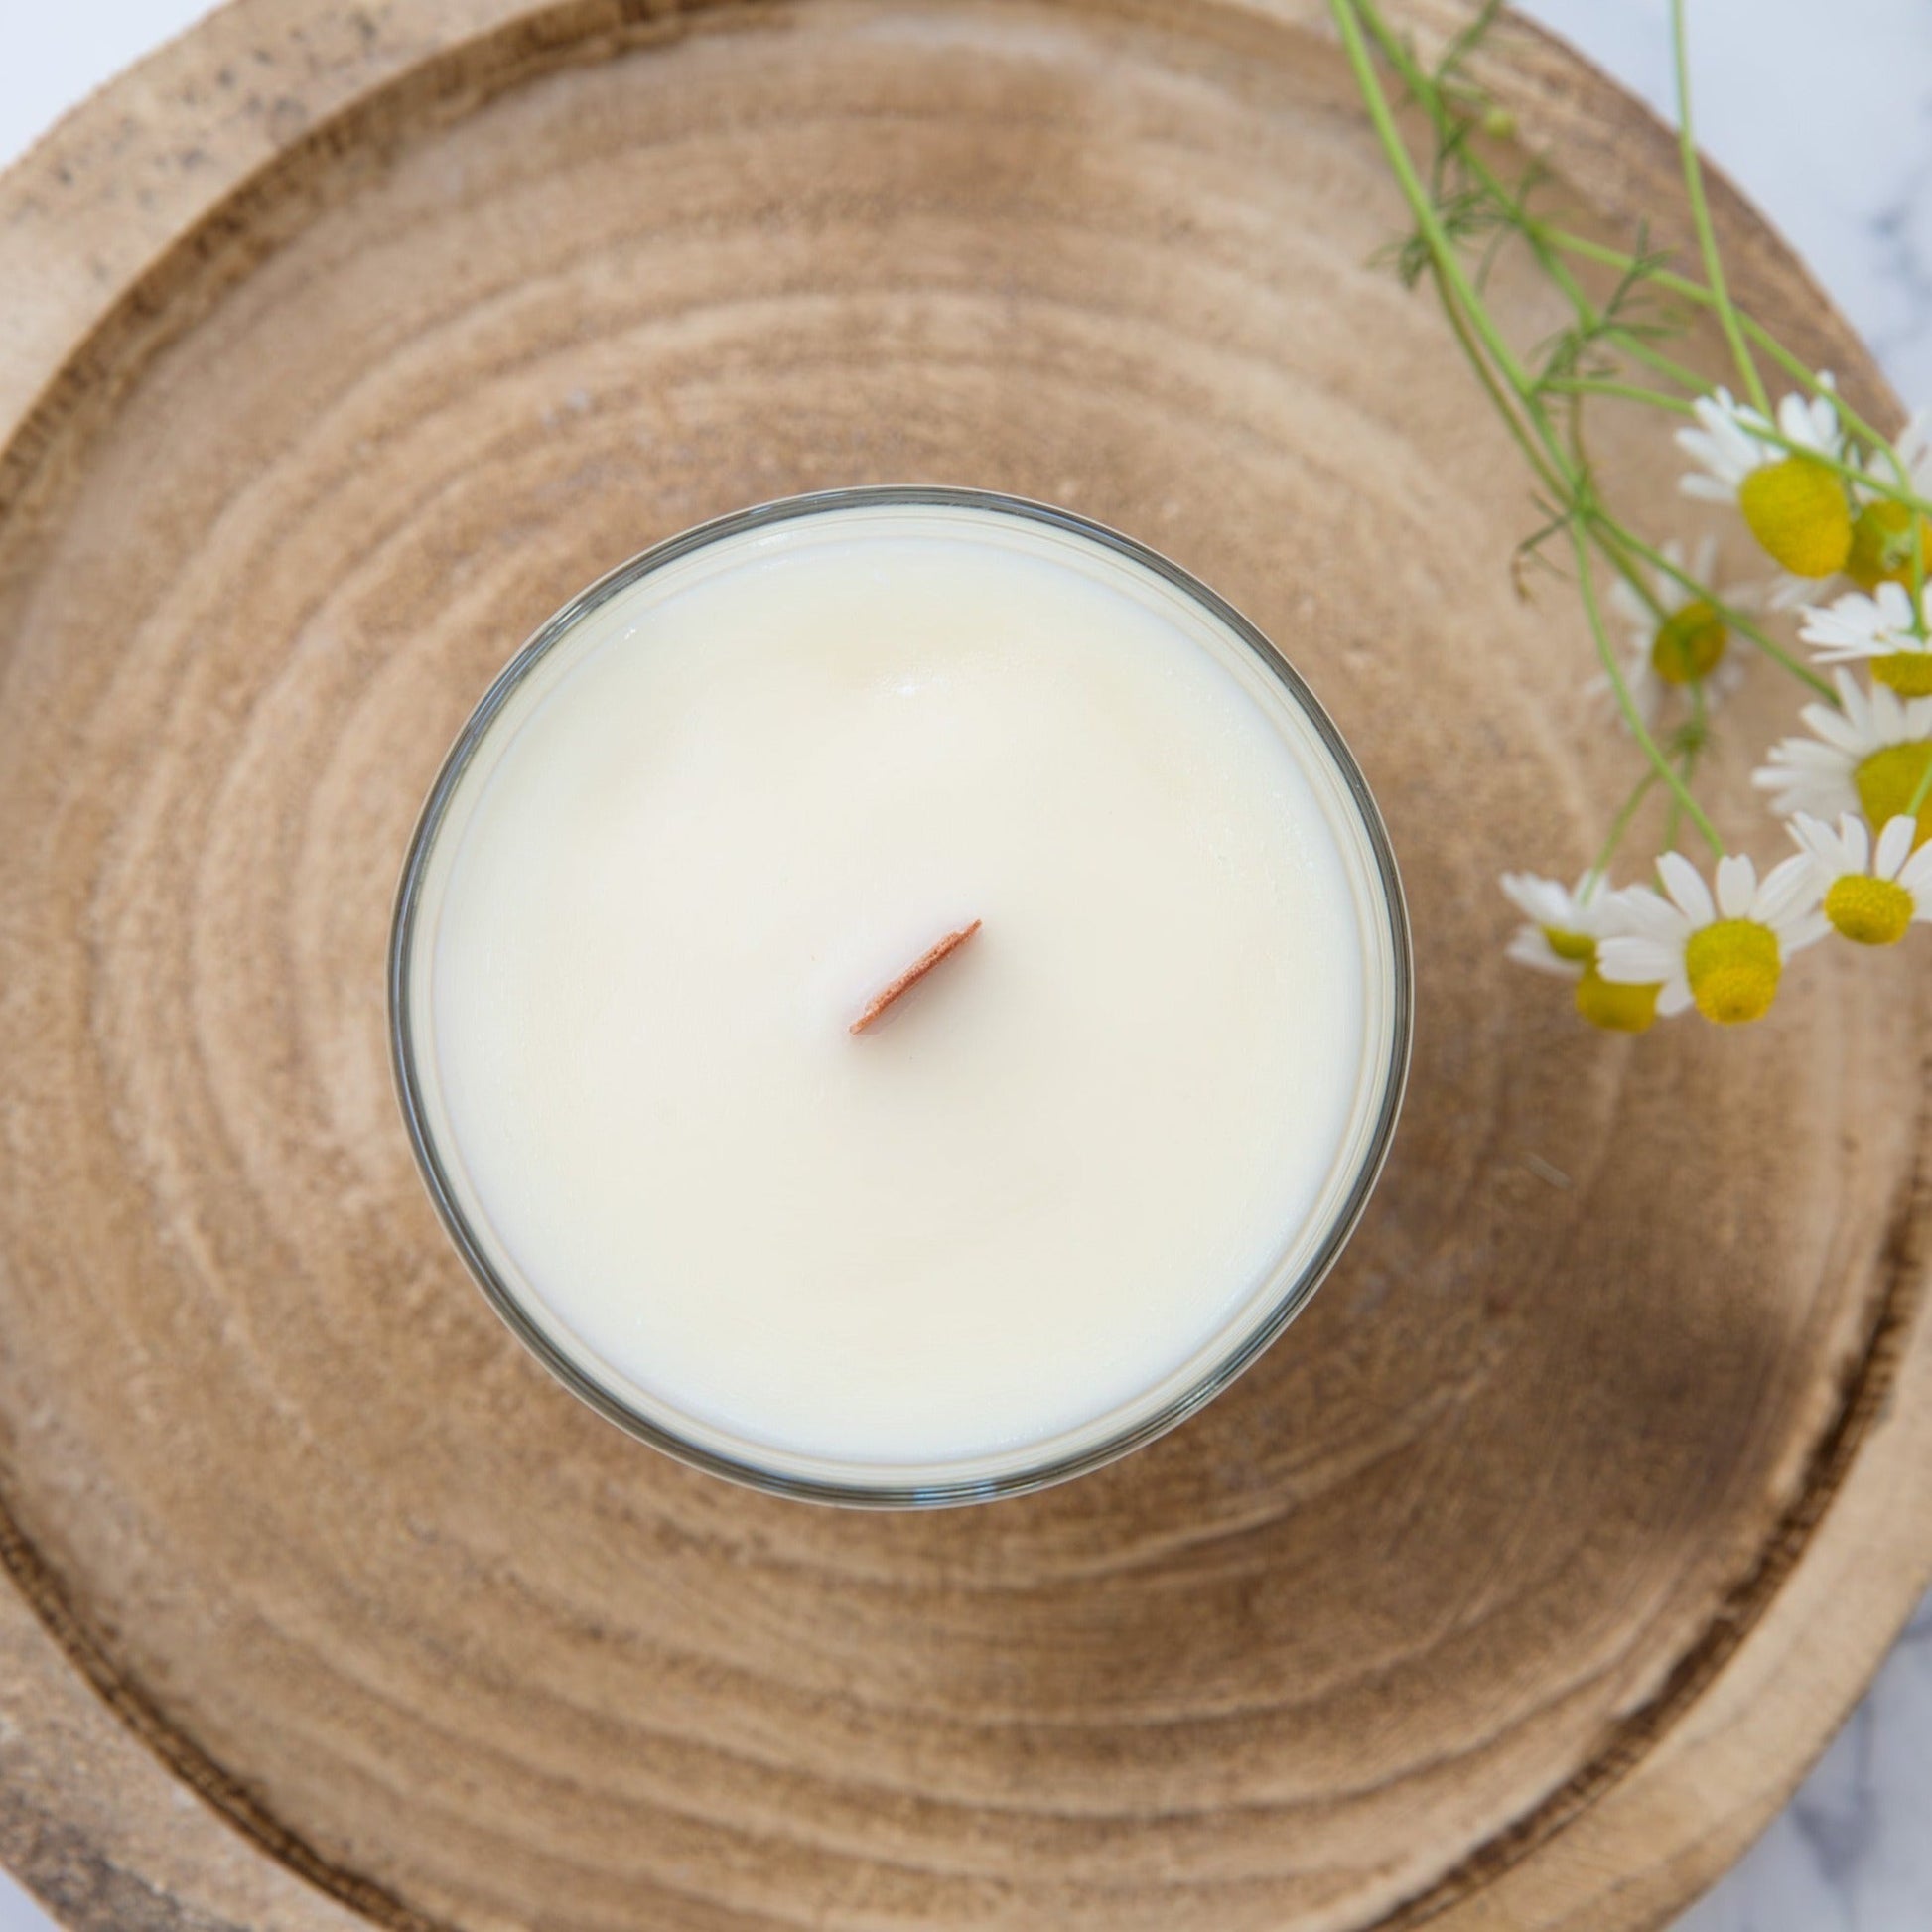 100% UK Soy Wax, Highly Scented, Handmade, Natural, Soy Candles - Hideaway Home Fragrances